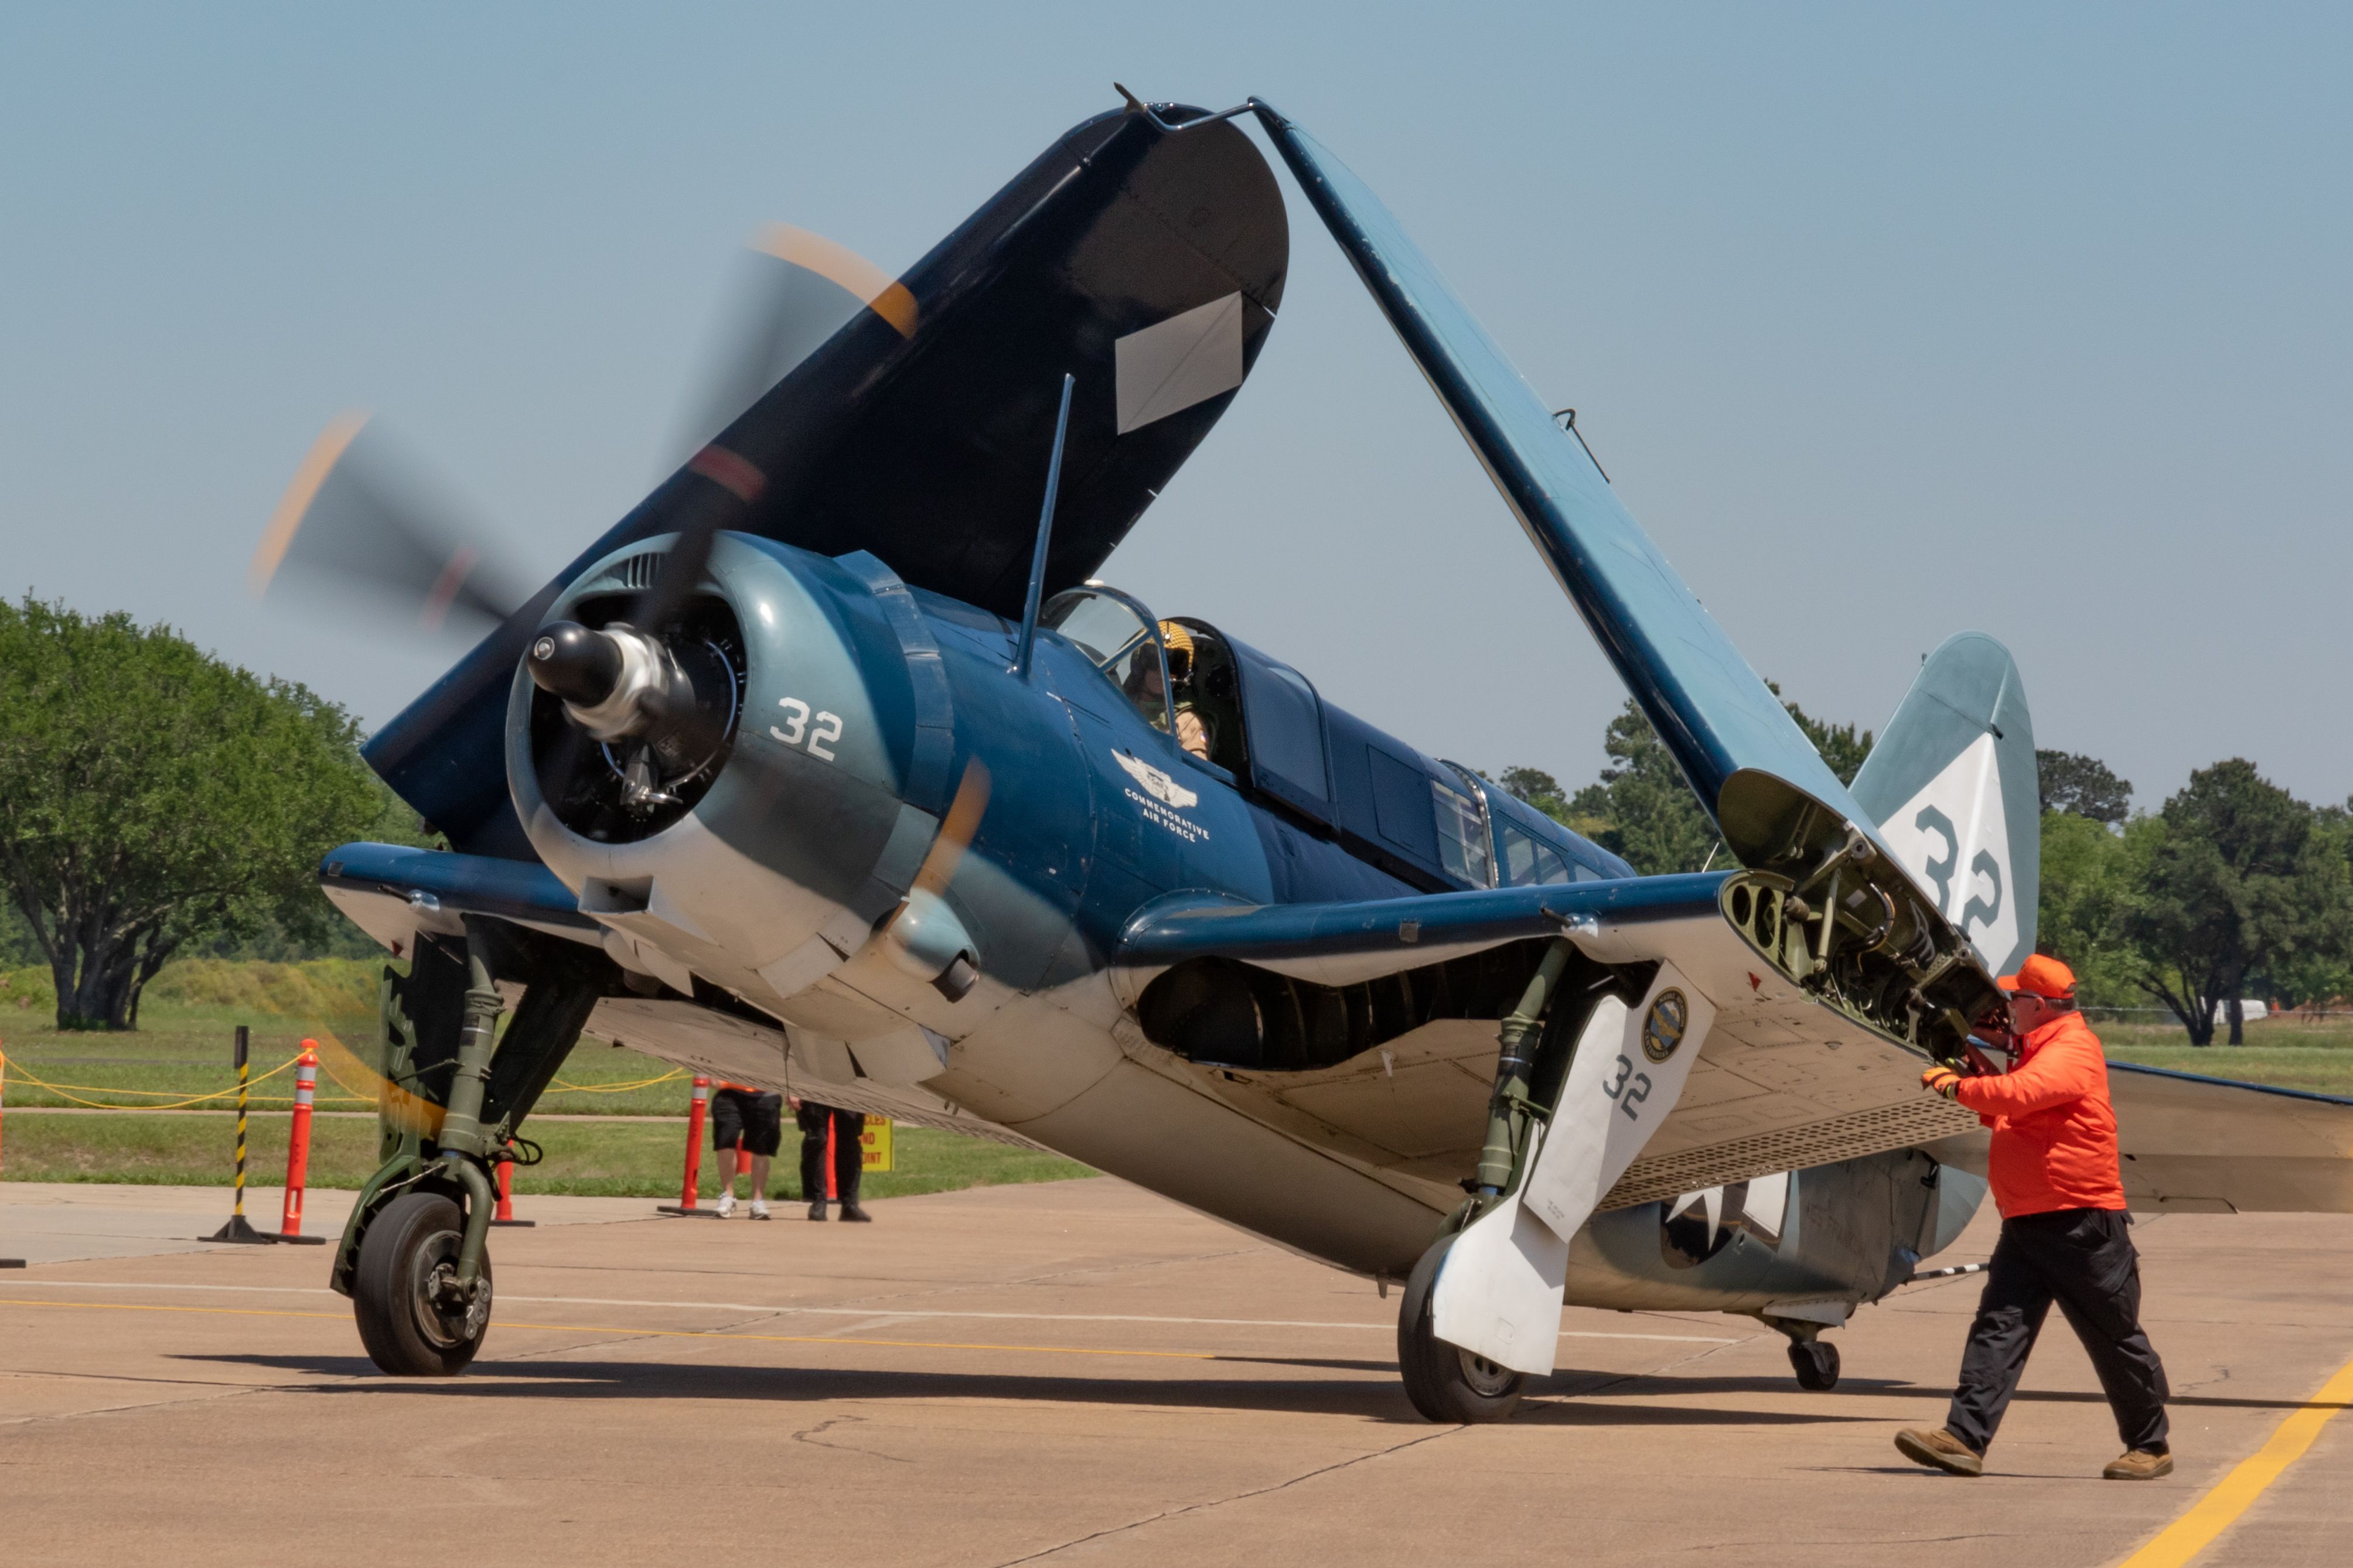 Experimental  (N92879) - SB2C-5 Helldiver aircraft with wings folded taxies after landing at Houston Executive Airport in April 2019. This is the only flying example of this aircraft type in the world.